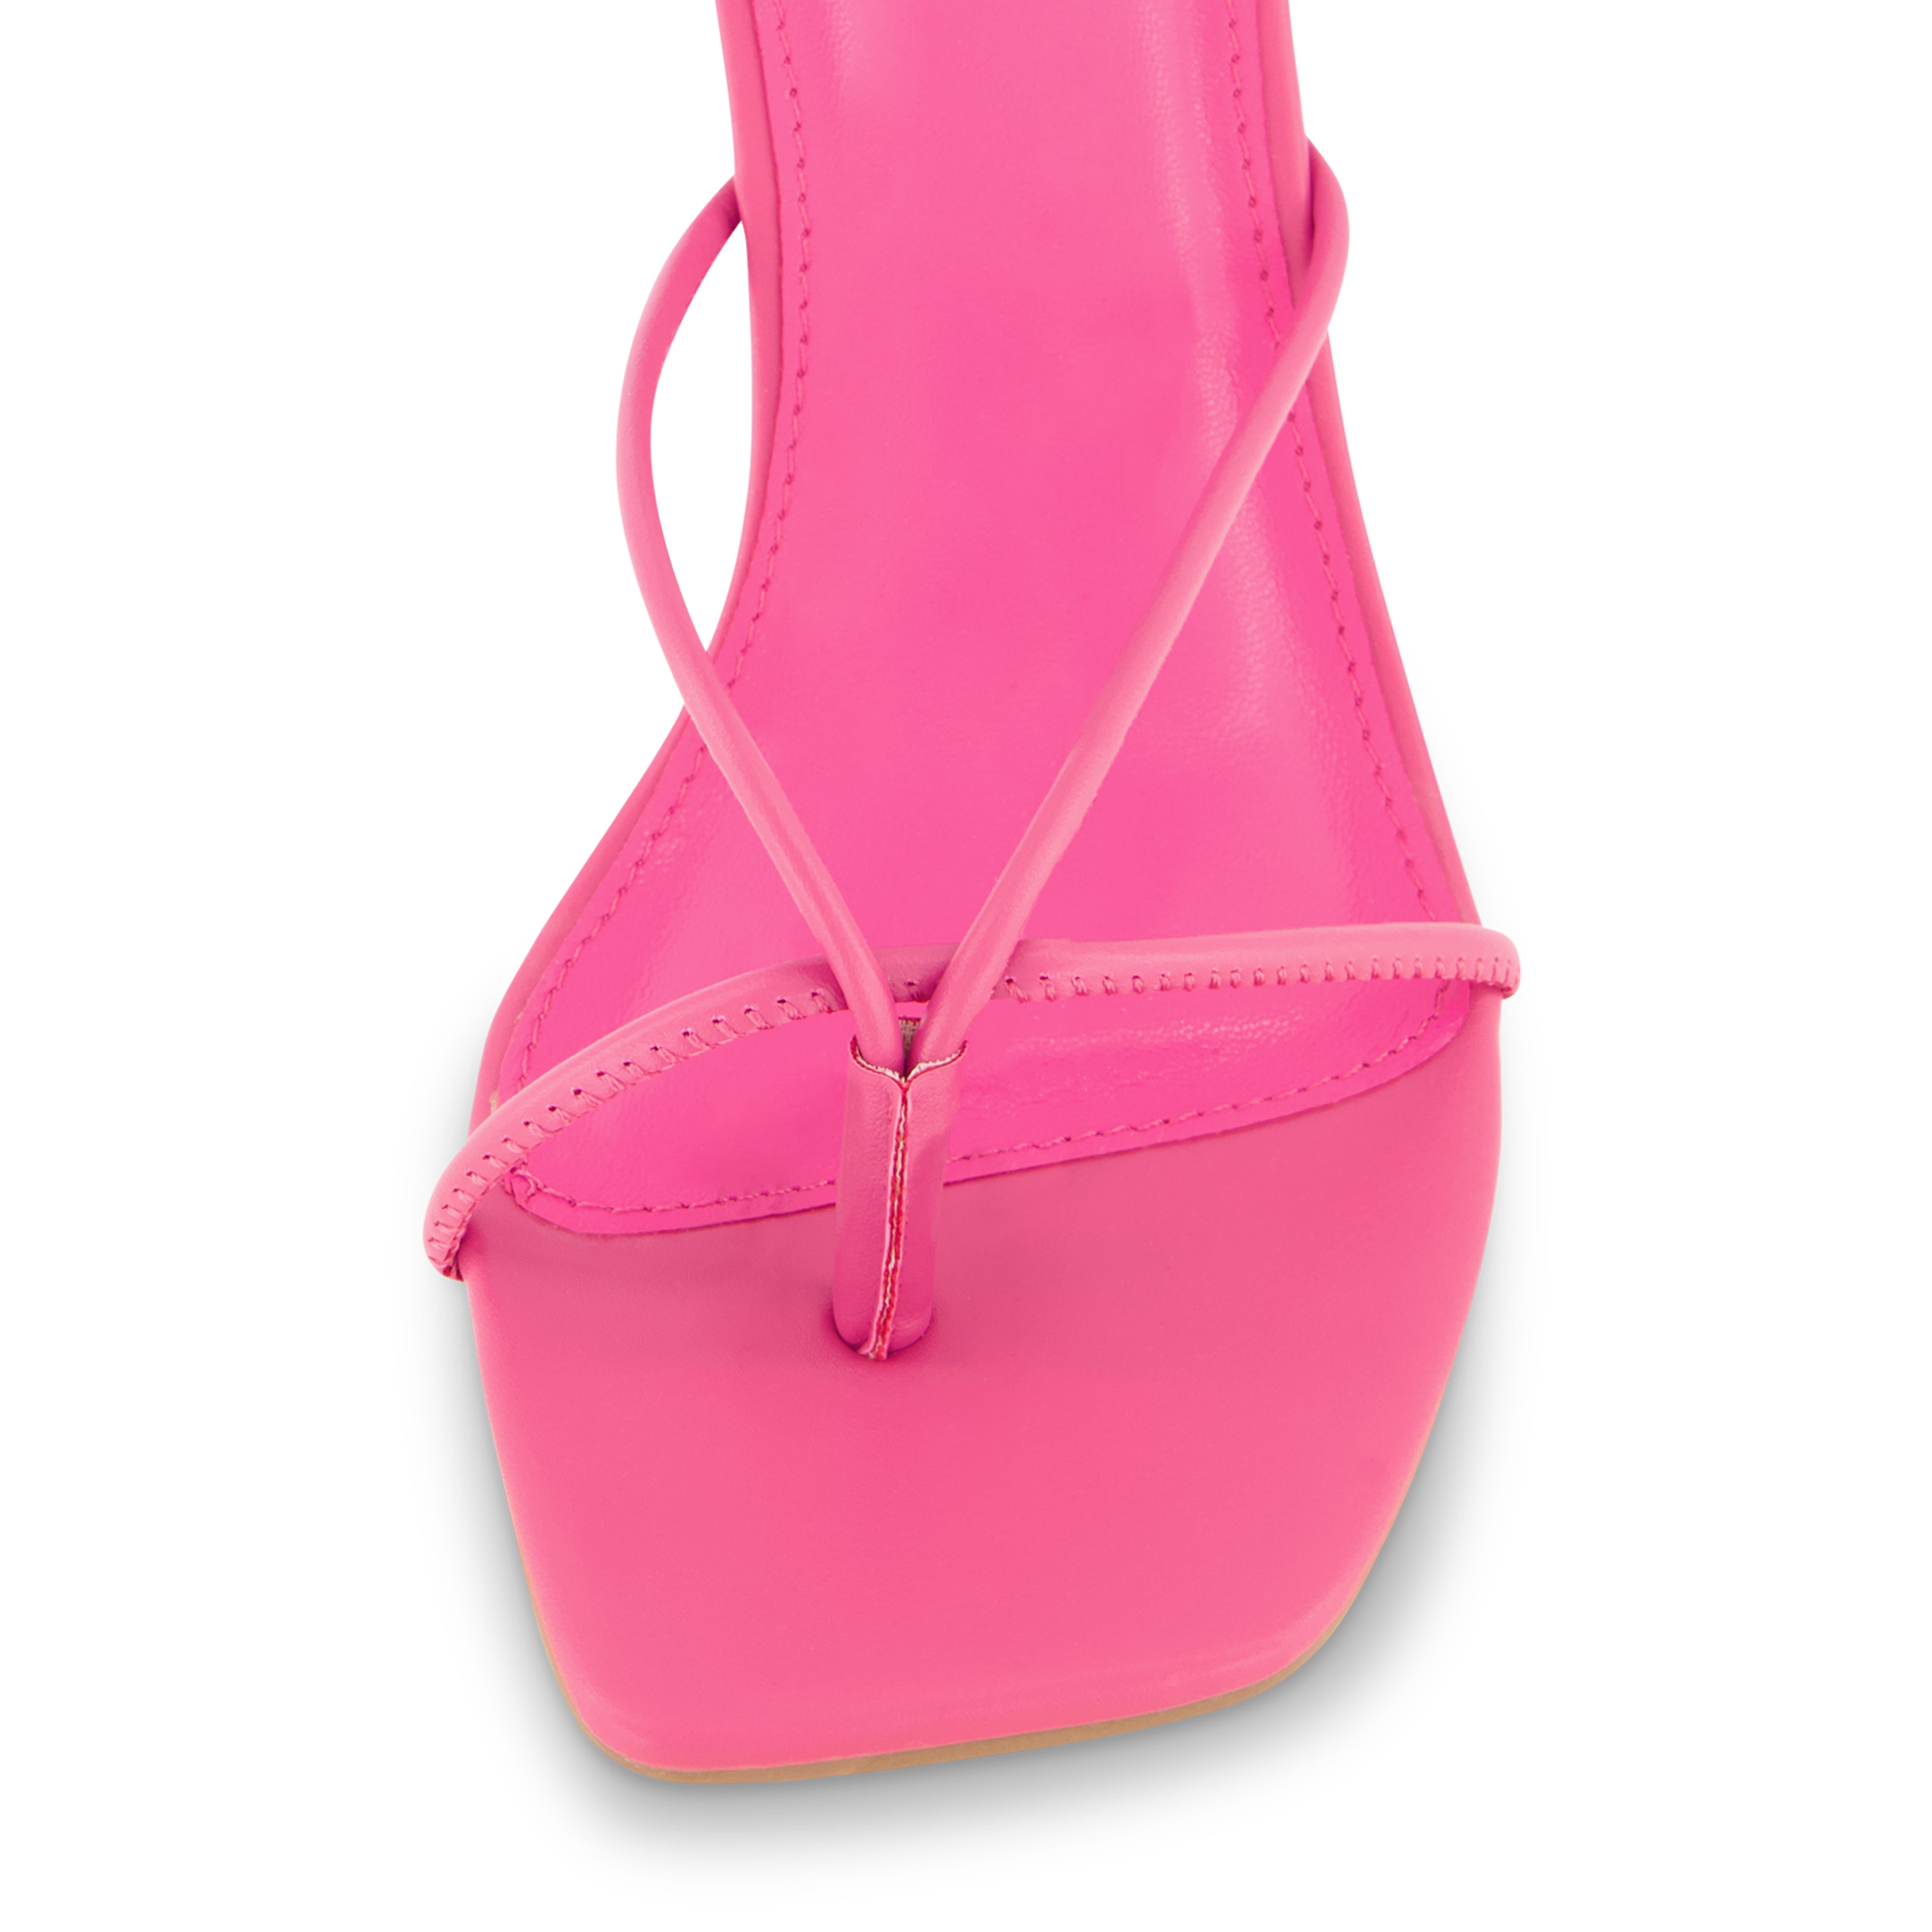 Belaire Strappy Dress Sandal Holiday